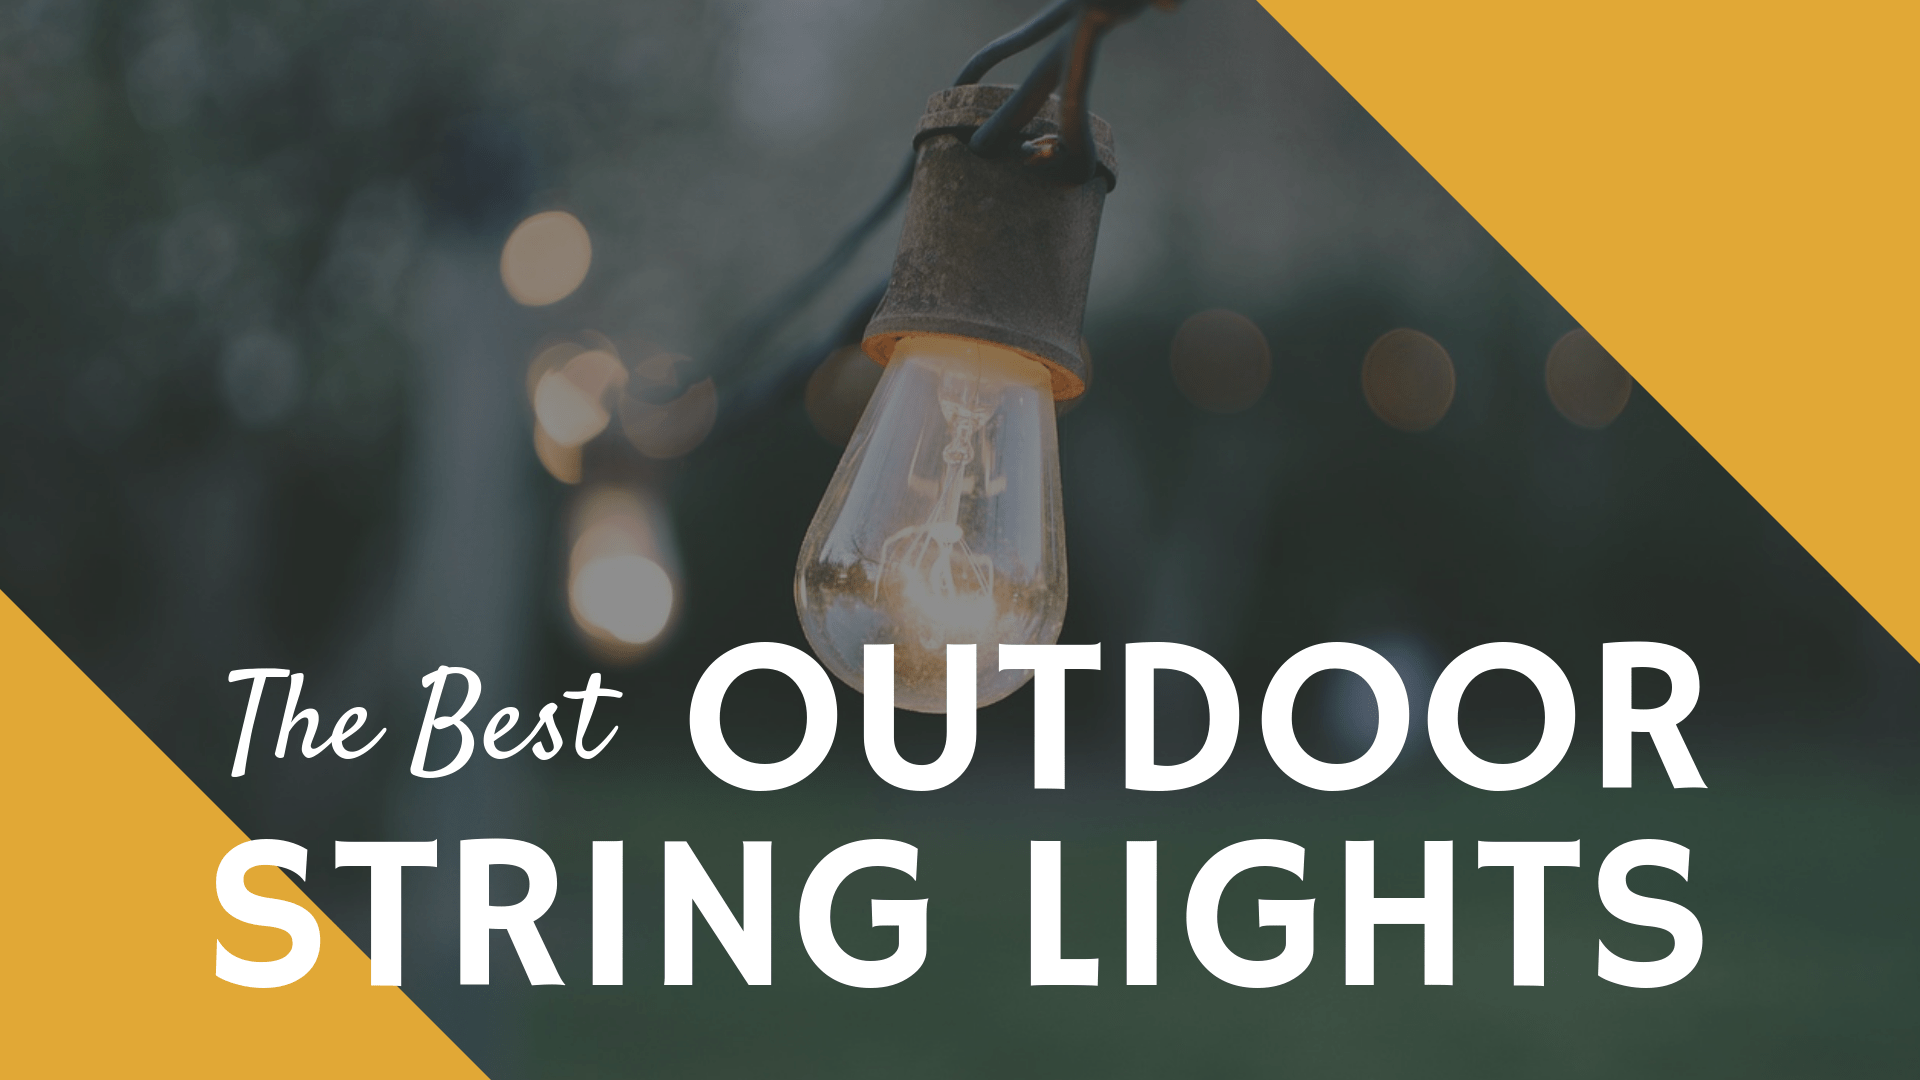 The Best Outdoor String Lights